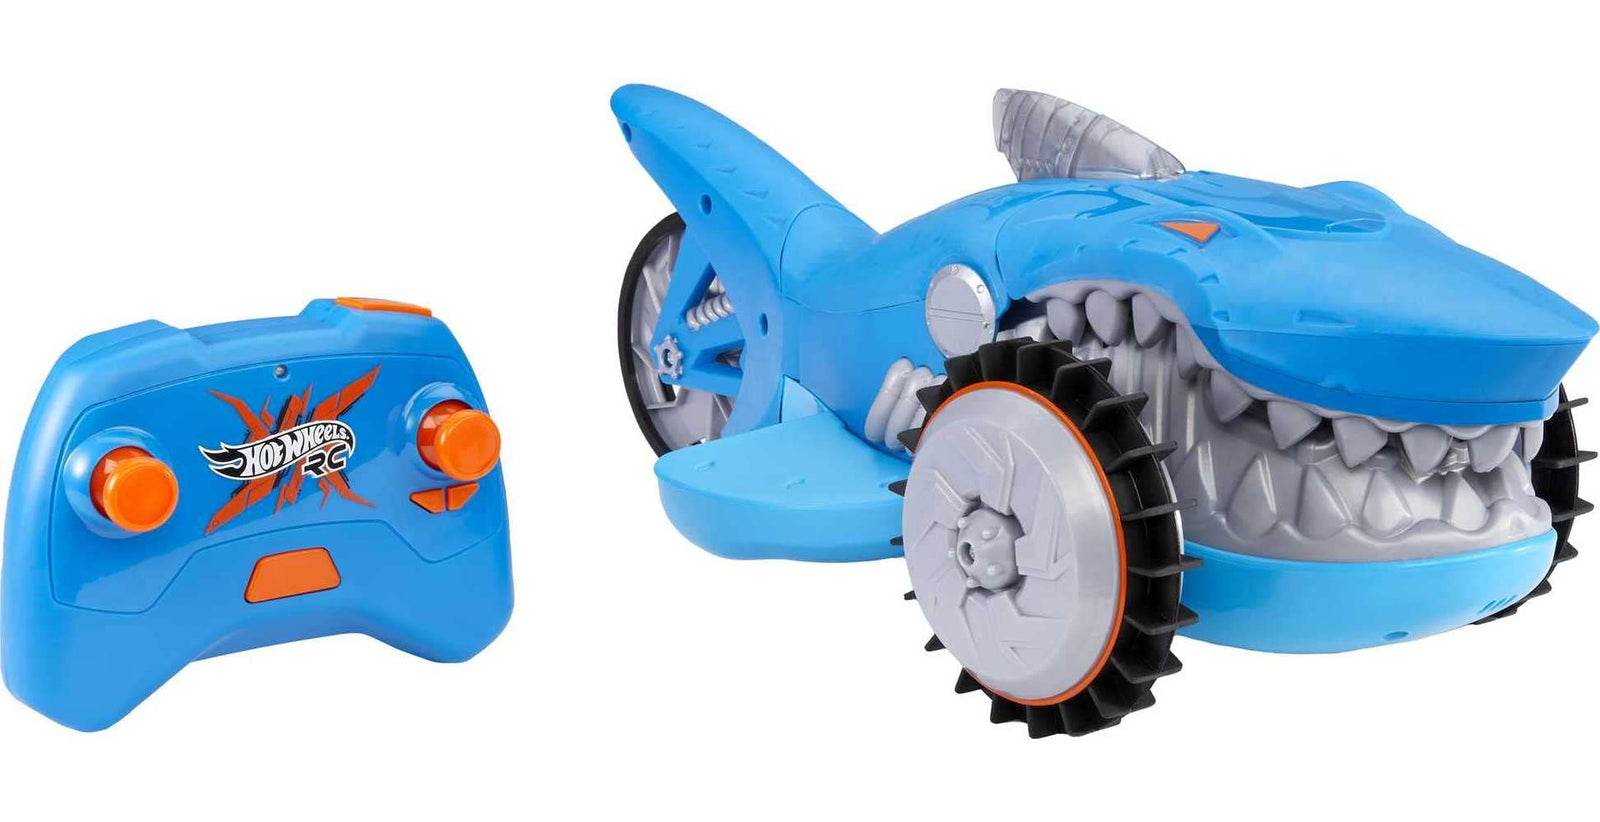 Hot Wheels R/C Supercharged Shark Vehicle, Radio-Controlled Shark that Races on Land & Water, R/C Chomping Mechanism, Dynamic Steering